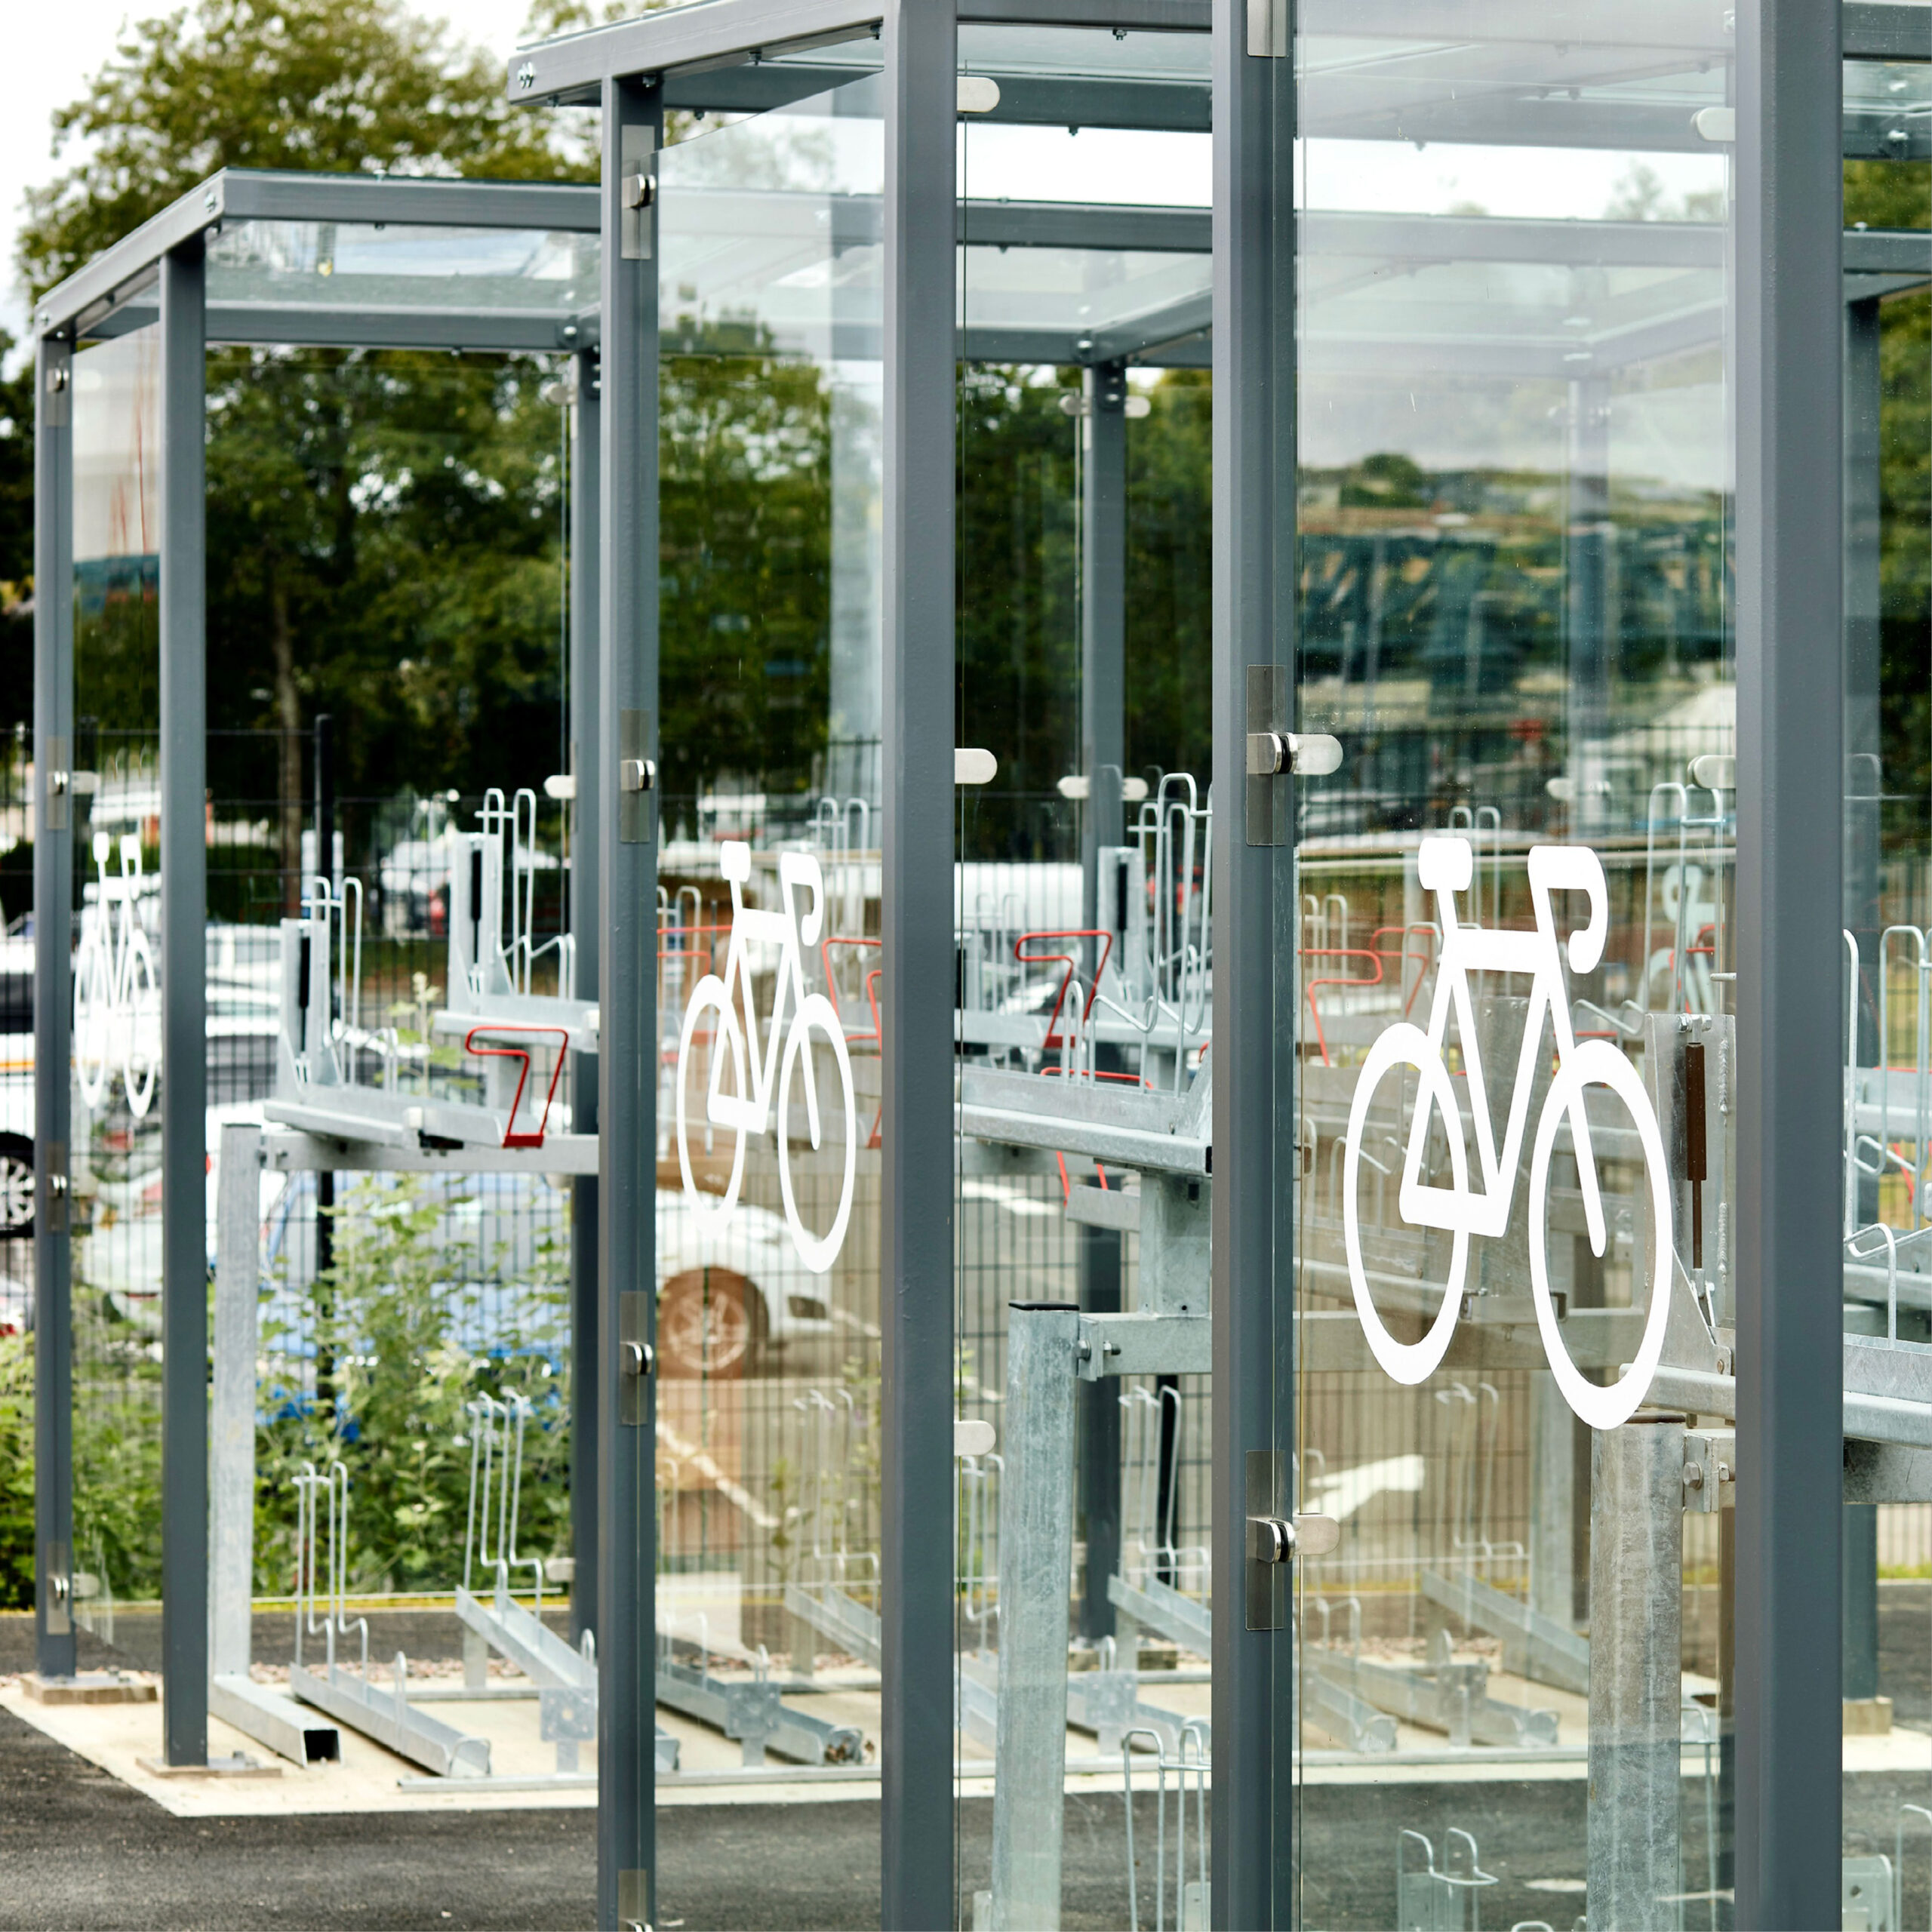 Transparent bike lockers and racks with white bicycle symbols, located in a public parking area for secure bicycle storage.